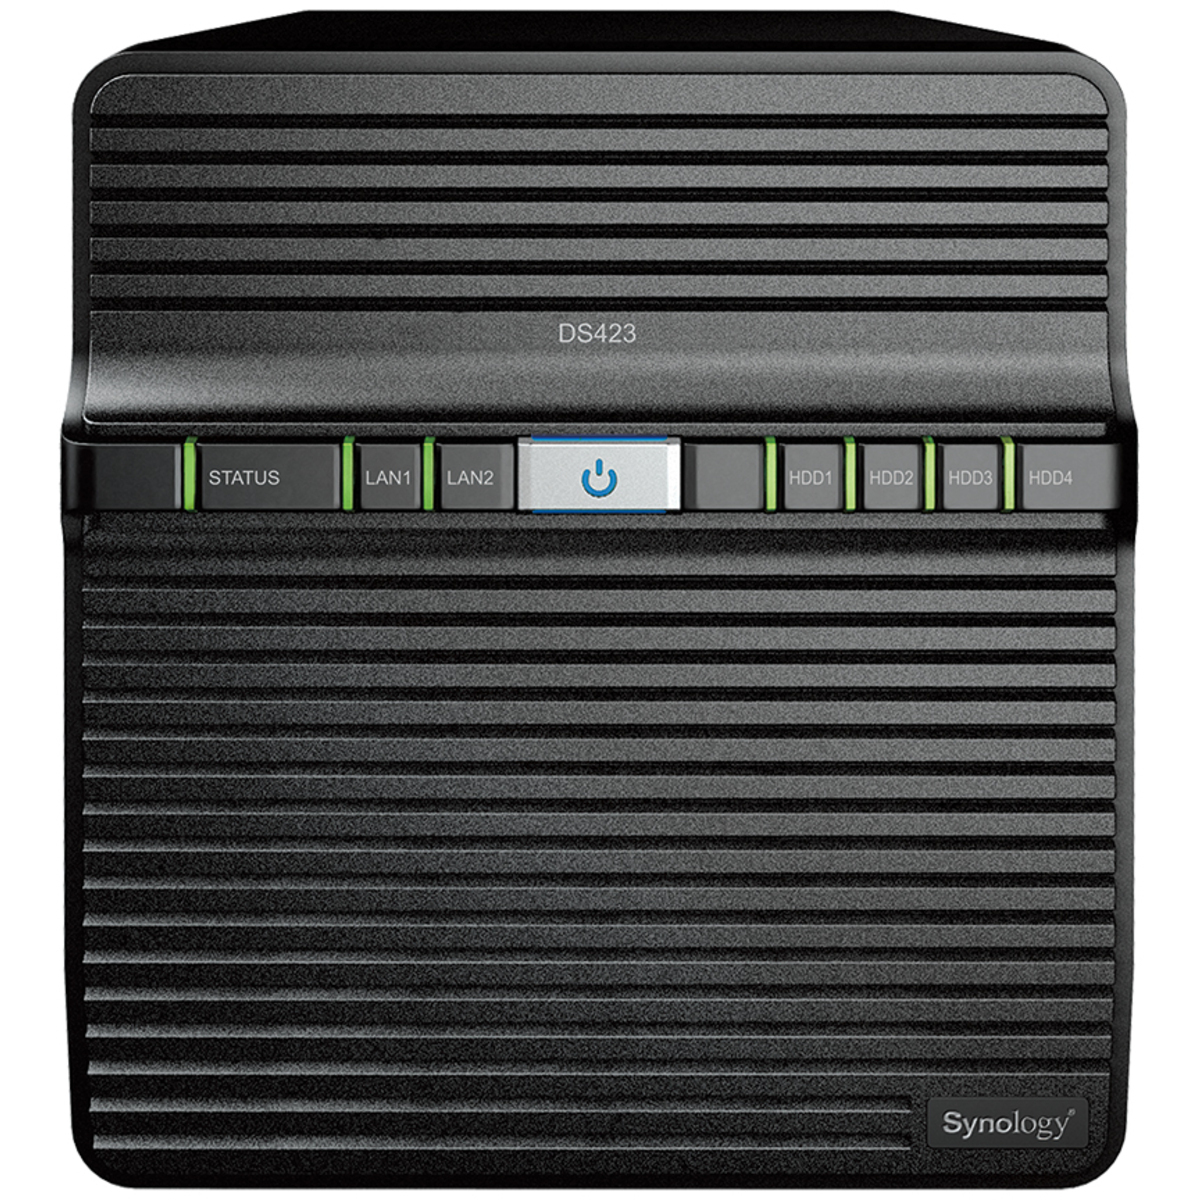 Synology DiskStation DS423 16tb 4-Bay Desktop Personal / Basic Home / Small Office NAS - Network Attached Storage Device 2x8tb TeamGroup EX2 Elite T253E2008T0C101 2.5 550/520MB/s SATA 6Gb/s SSD CONSUMER Class Drives Installed - Burn-In Tested DiskStation DS423